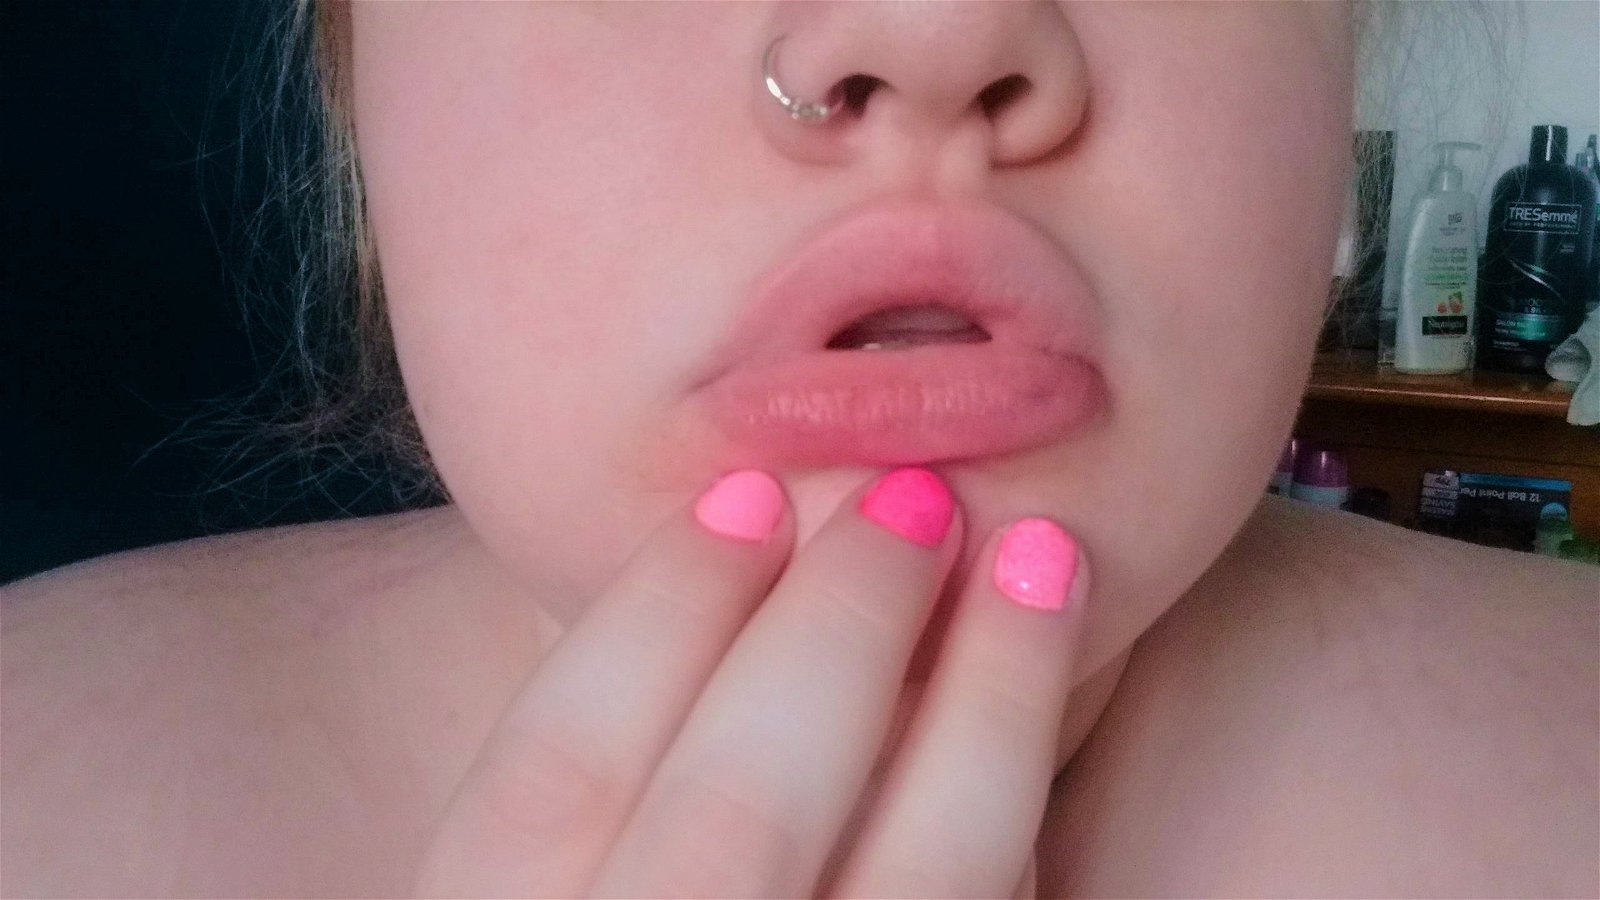 Photo by MadameEllie with the username @MadameEllie, who is a star user,  July 19, 2019 at 2:23 PM. The post is about the topic Findom and the text says 'SUB POSITIONS OPEN

These juicy lips are all you can think about... Imagine them curling into a wicked smile when you send. Amazon GCs from the .uk site, now. Don't keep me waiting 😈
madameelliehere@gmail.com'